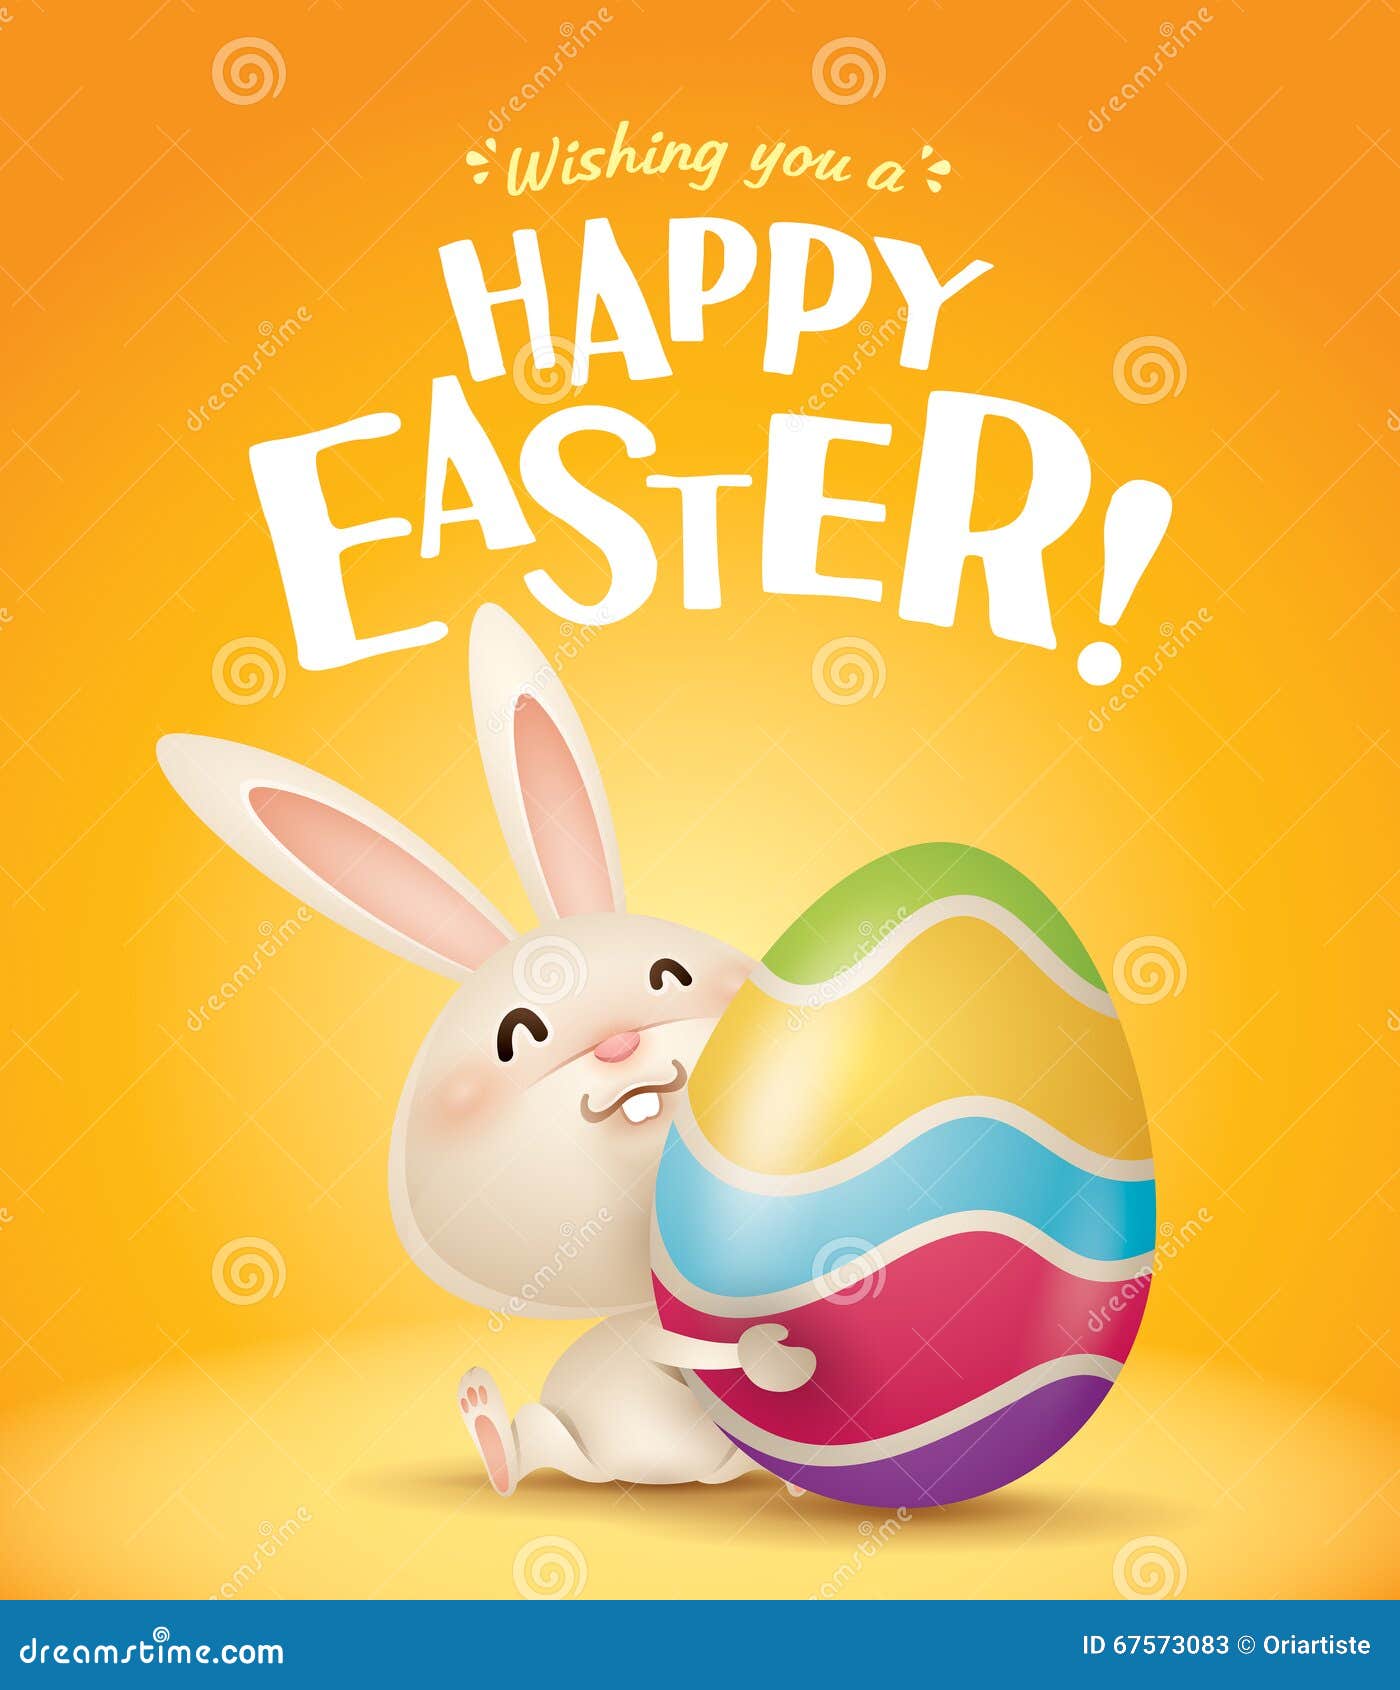 Happy Easter! stock vector. Illustration of cute, adorable - 67573083